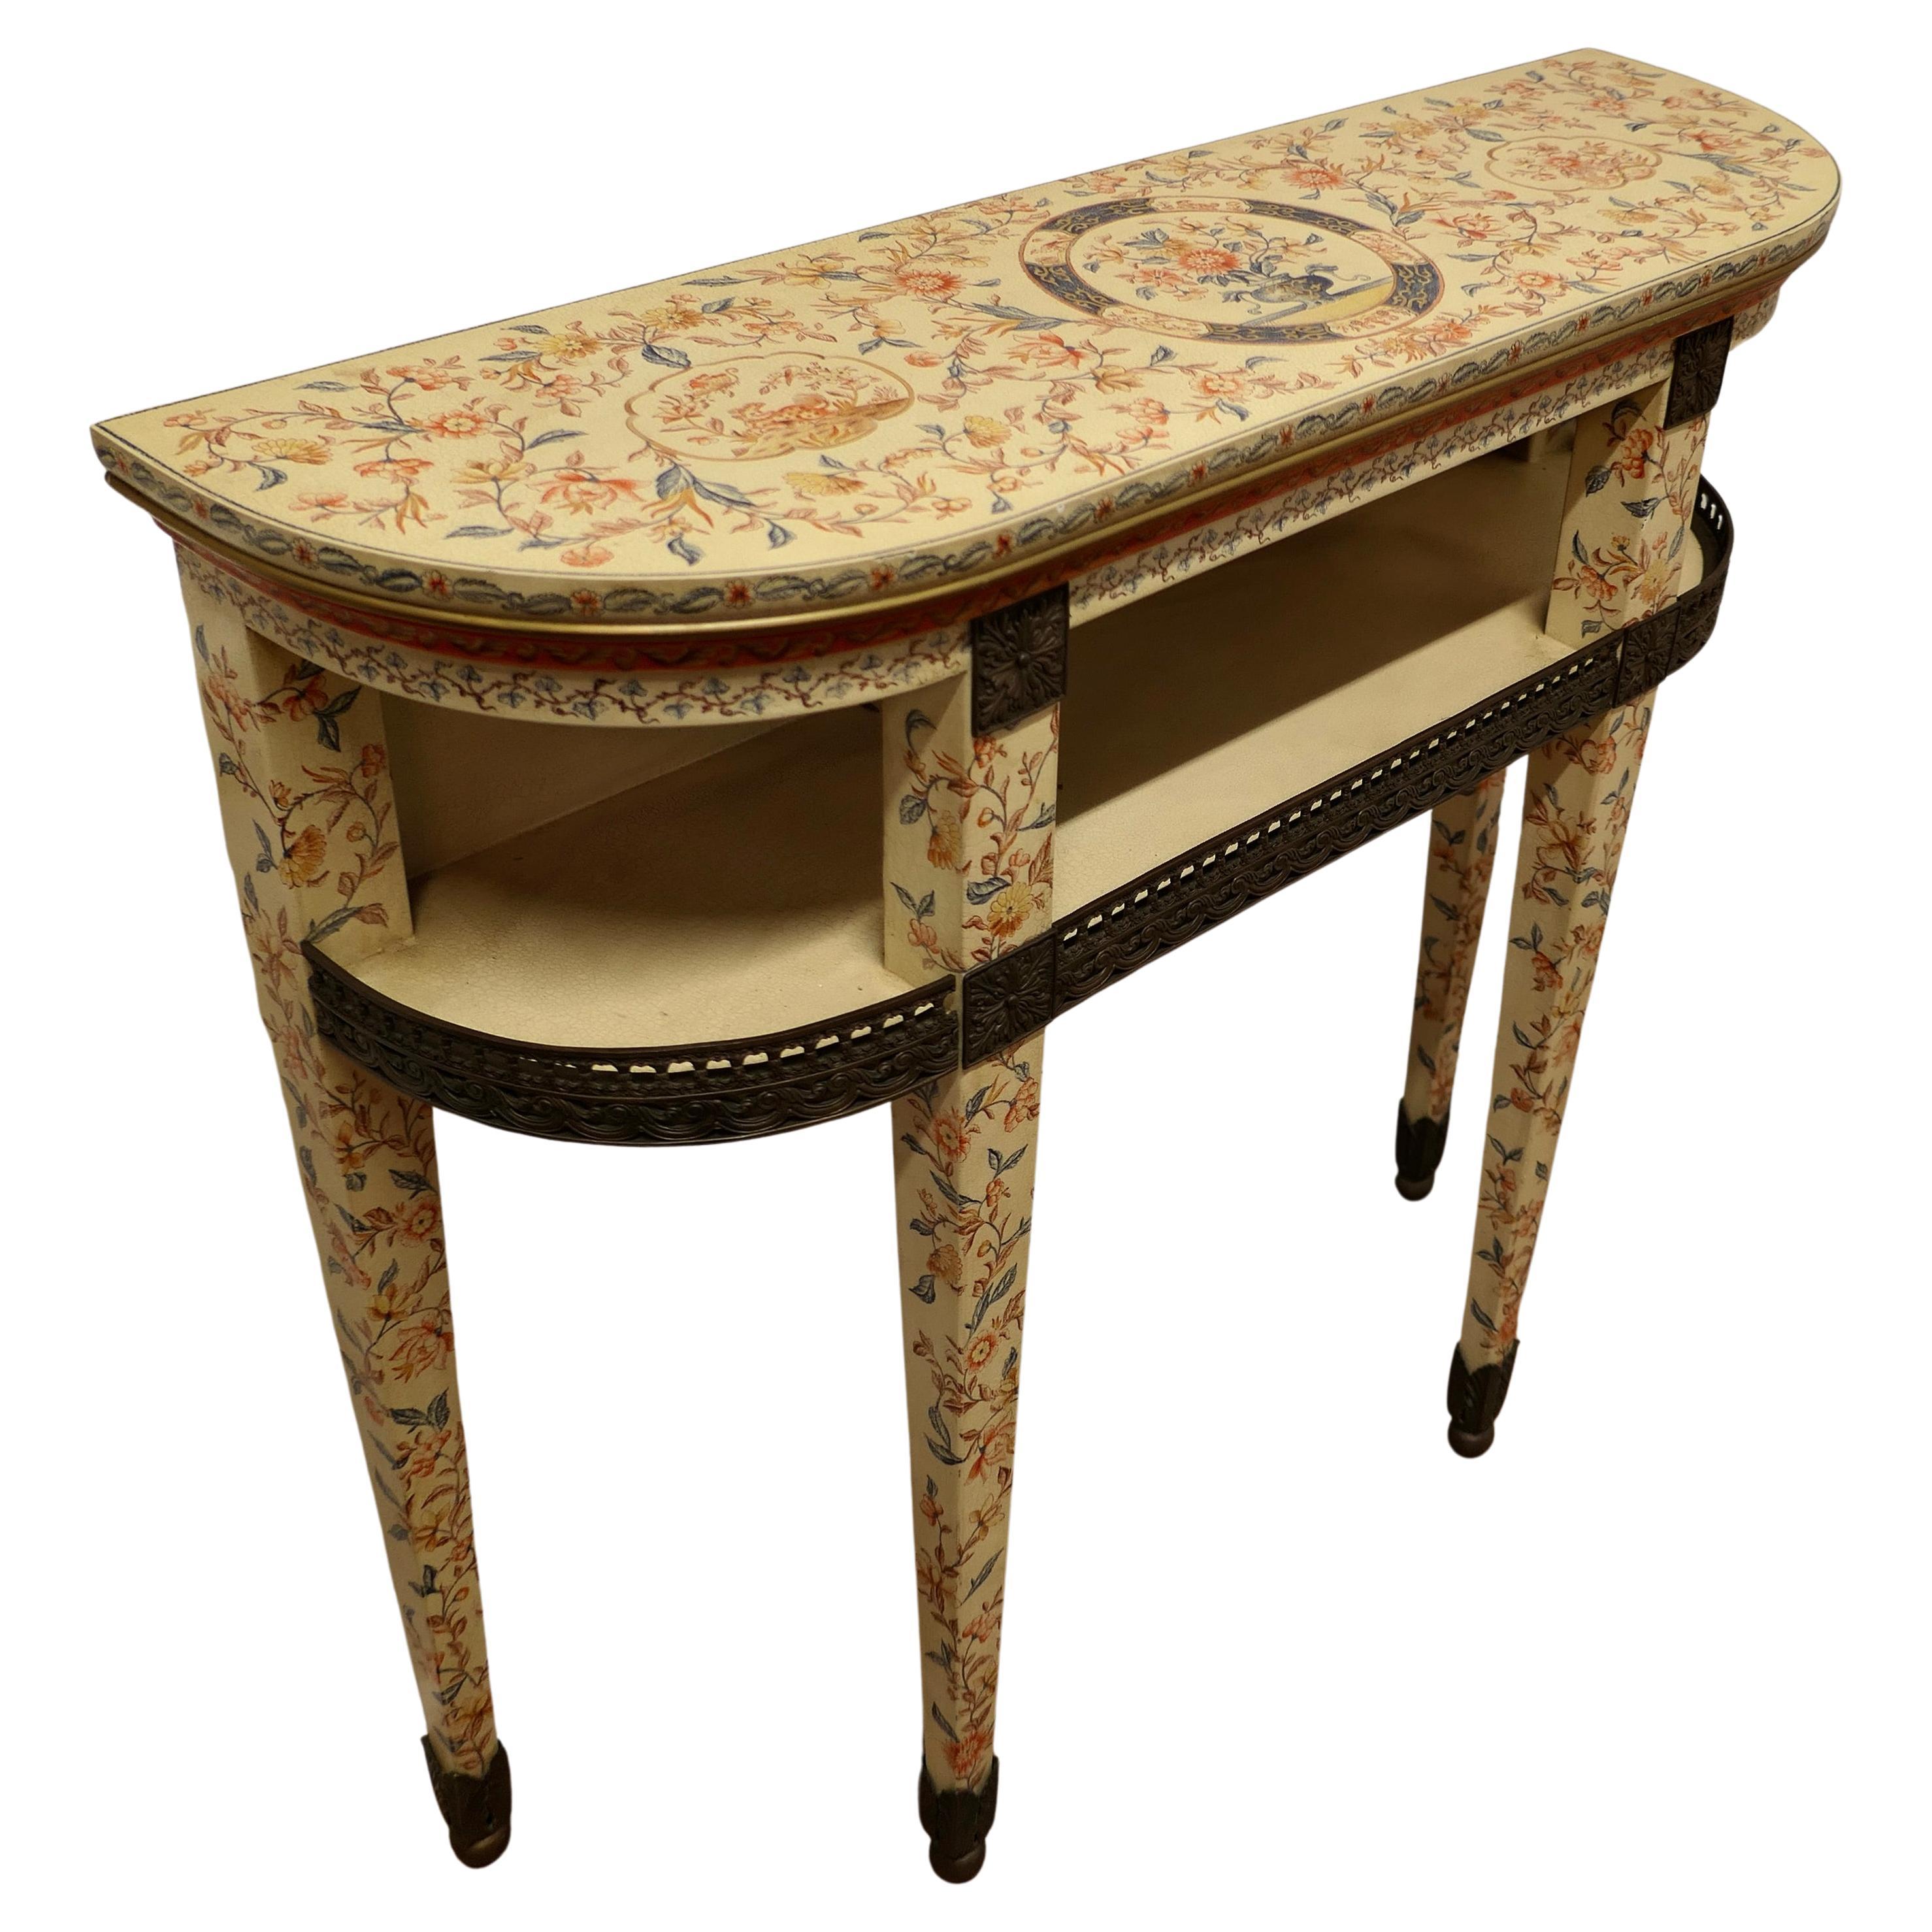 Imari Chinoiserie Style Painted Console Table This Is a Very Attractive Piece